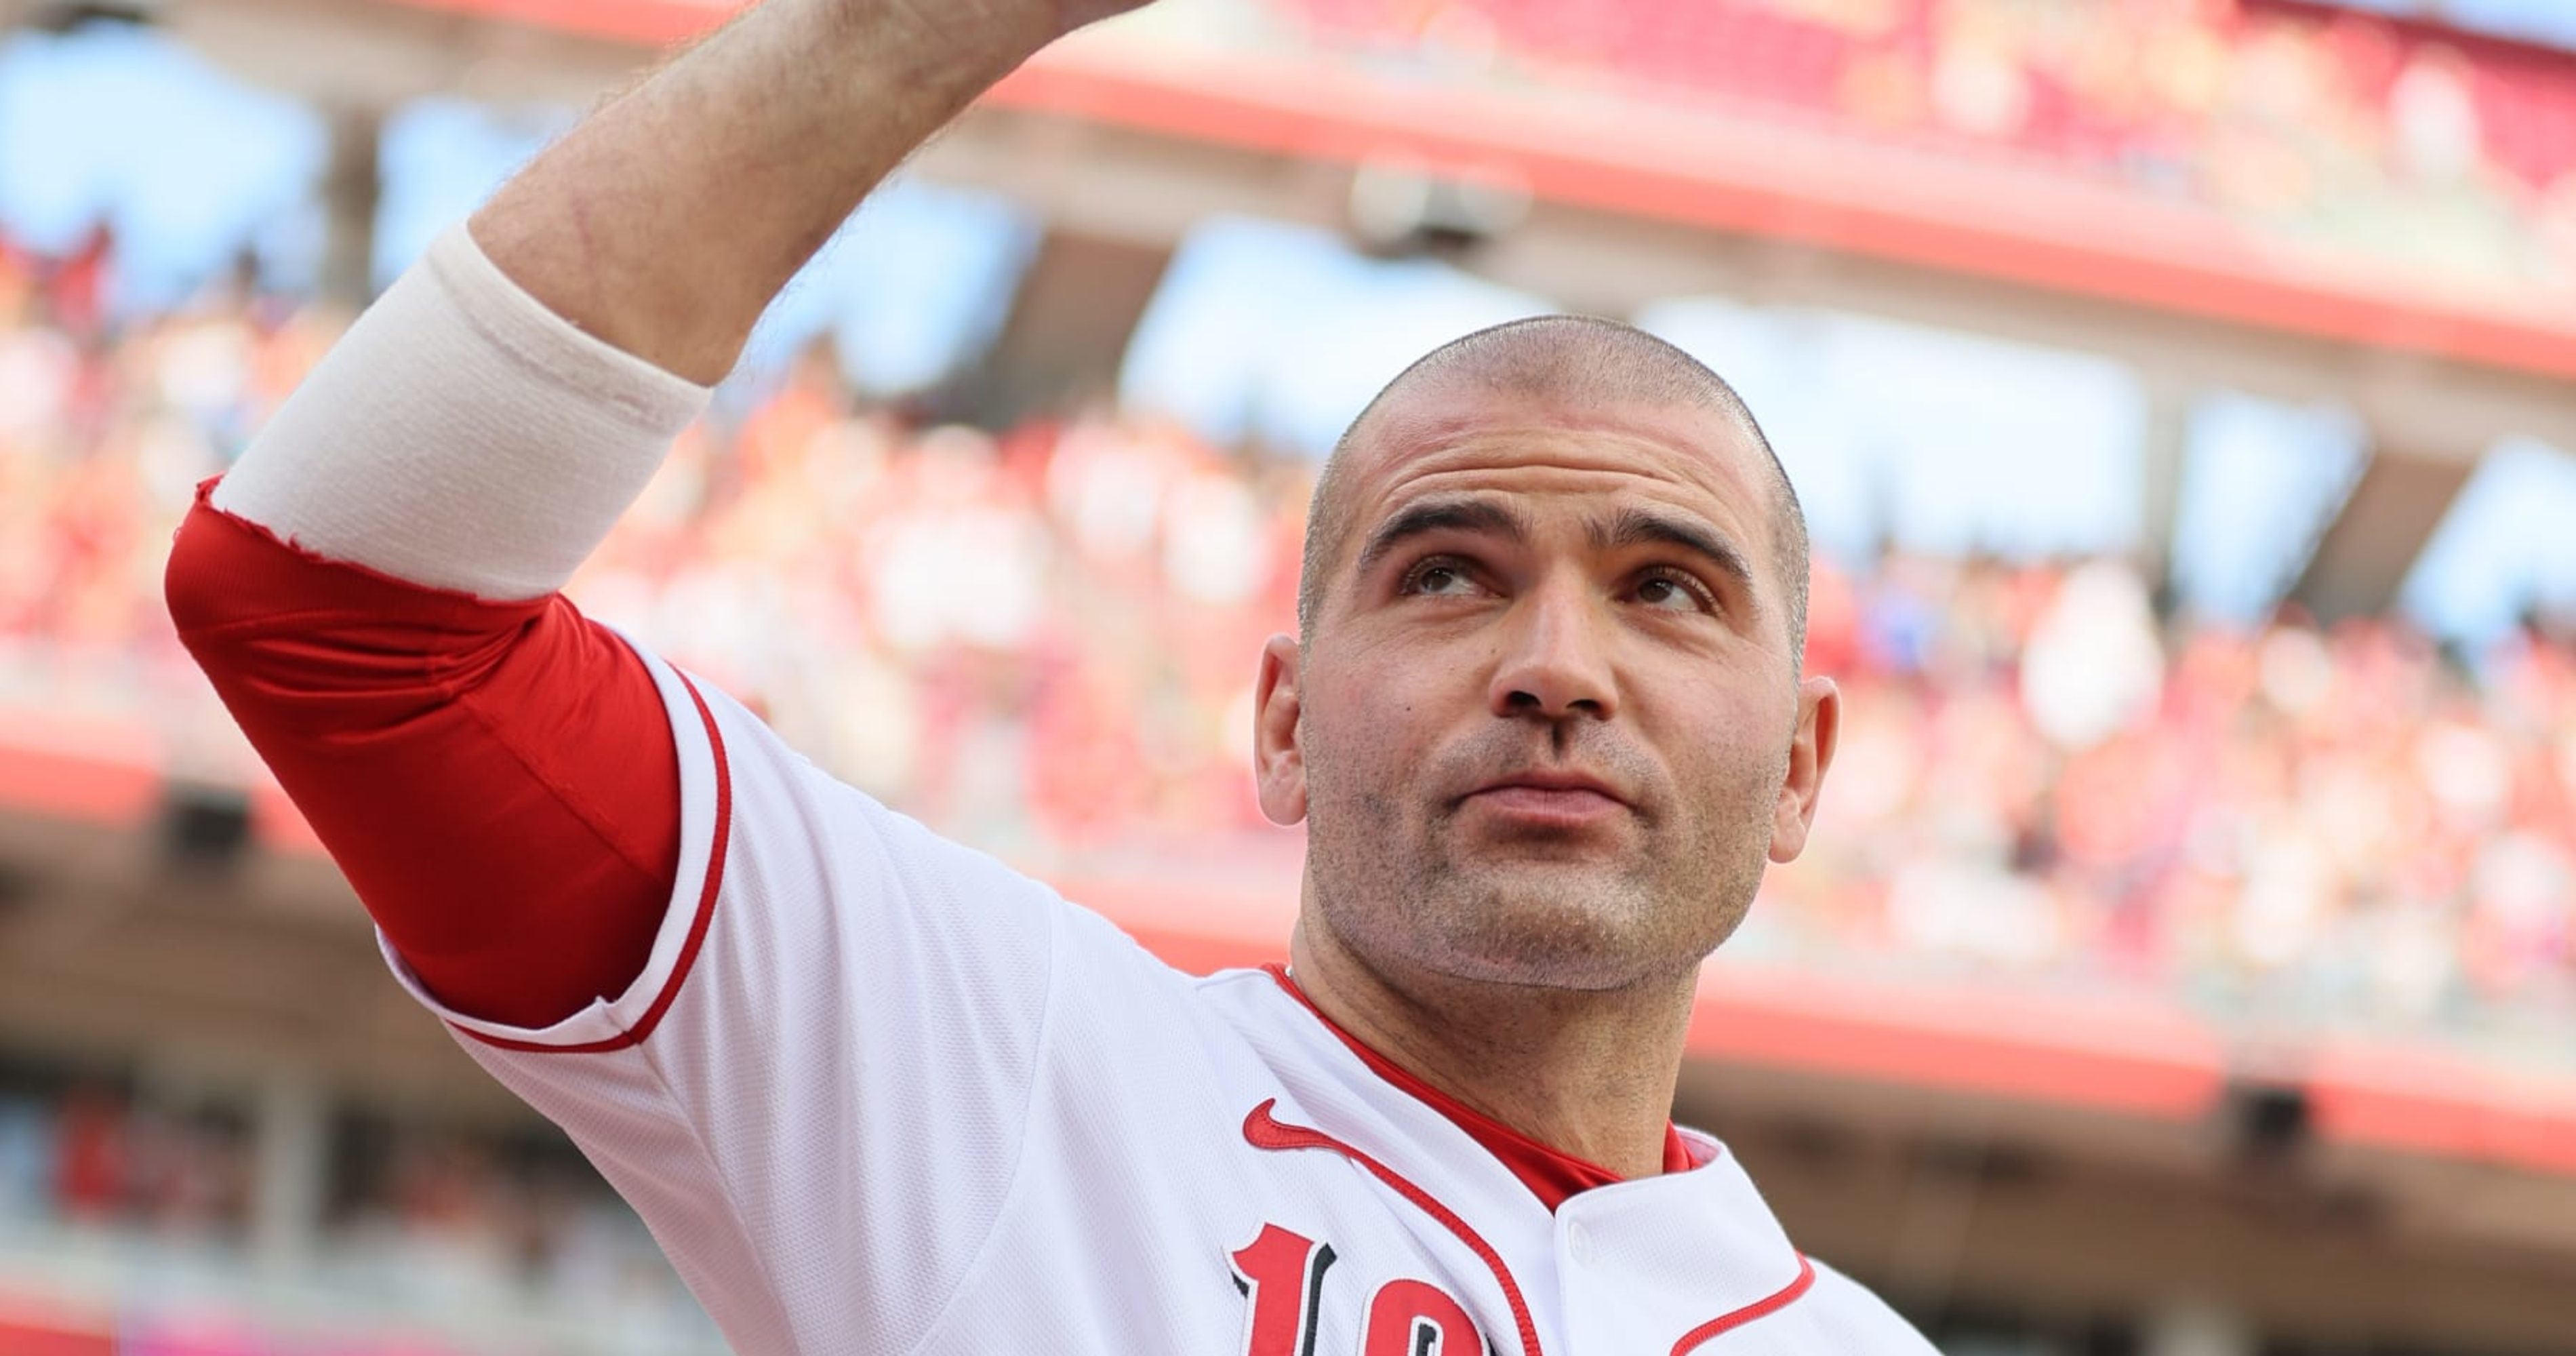 Joey Votto surprises young Reds fan who was in tears after his